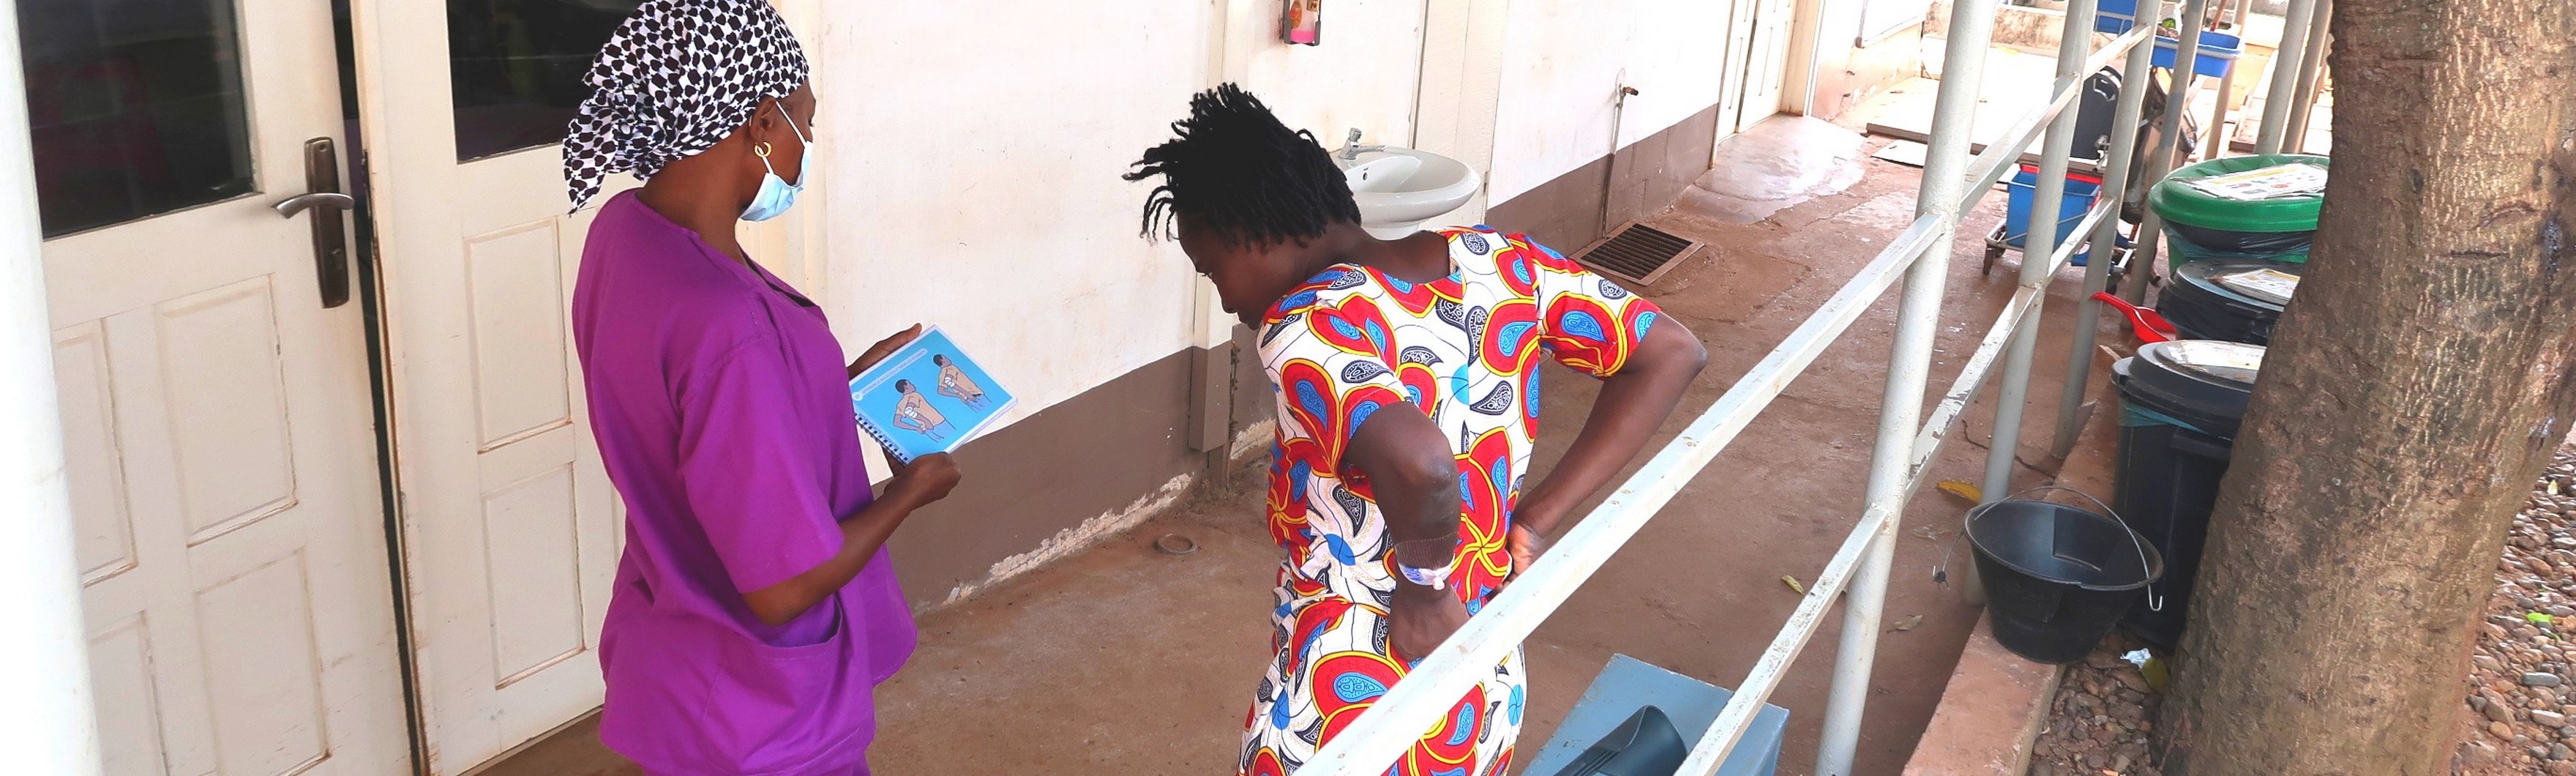 A physiotherapist uses the AIM-T pocket cards with a patient to assess her level of independence after trauma at the MSF Sica hospital in Bangui, Central African Republic.